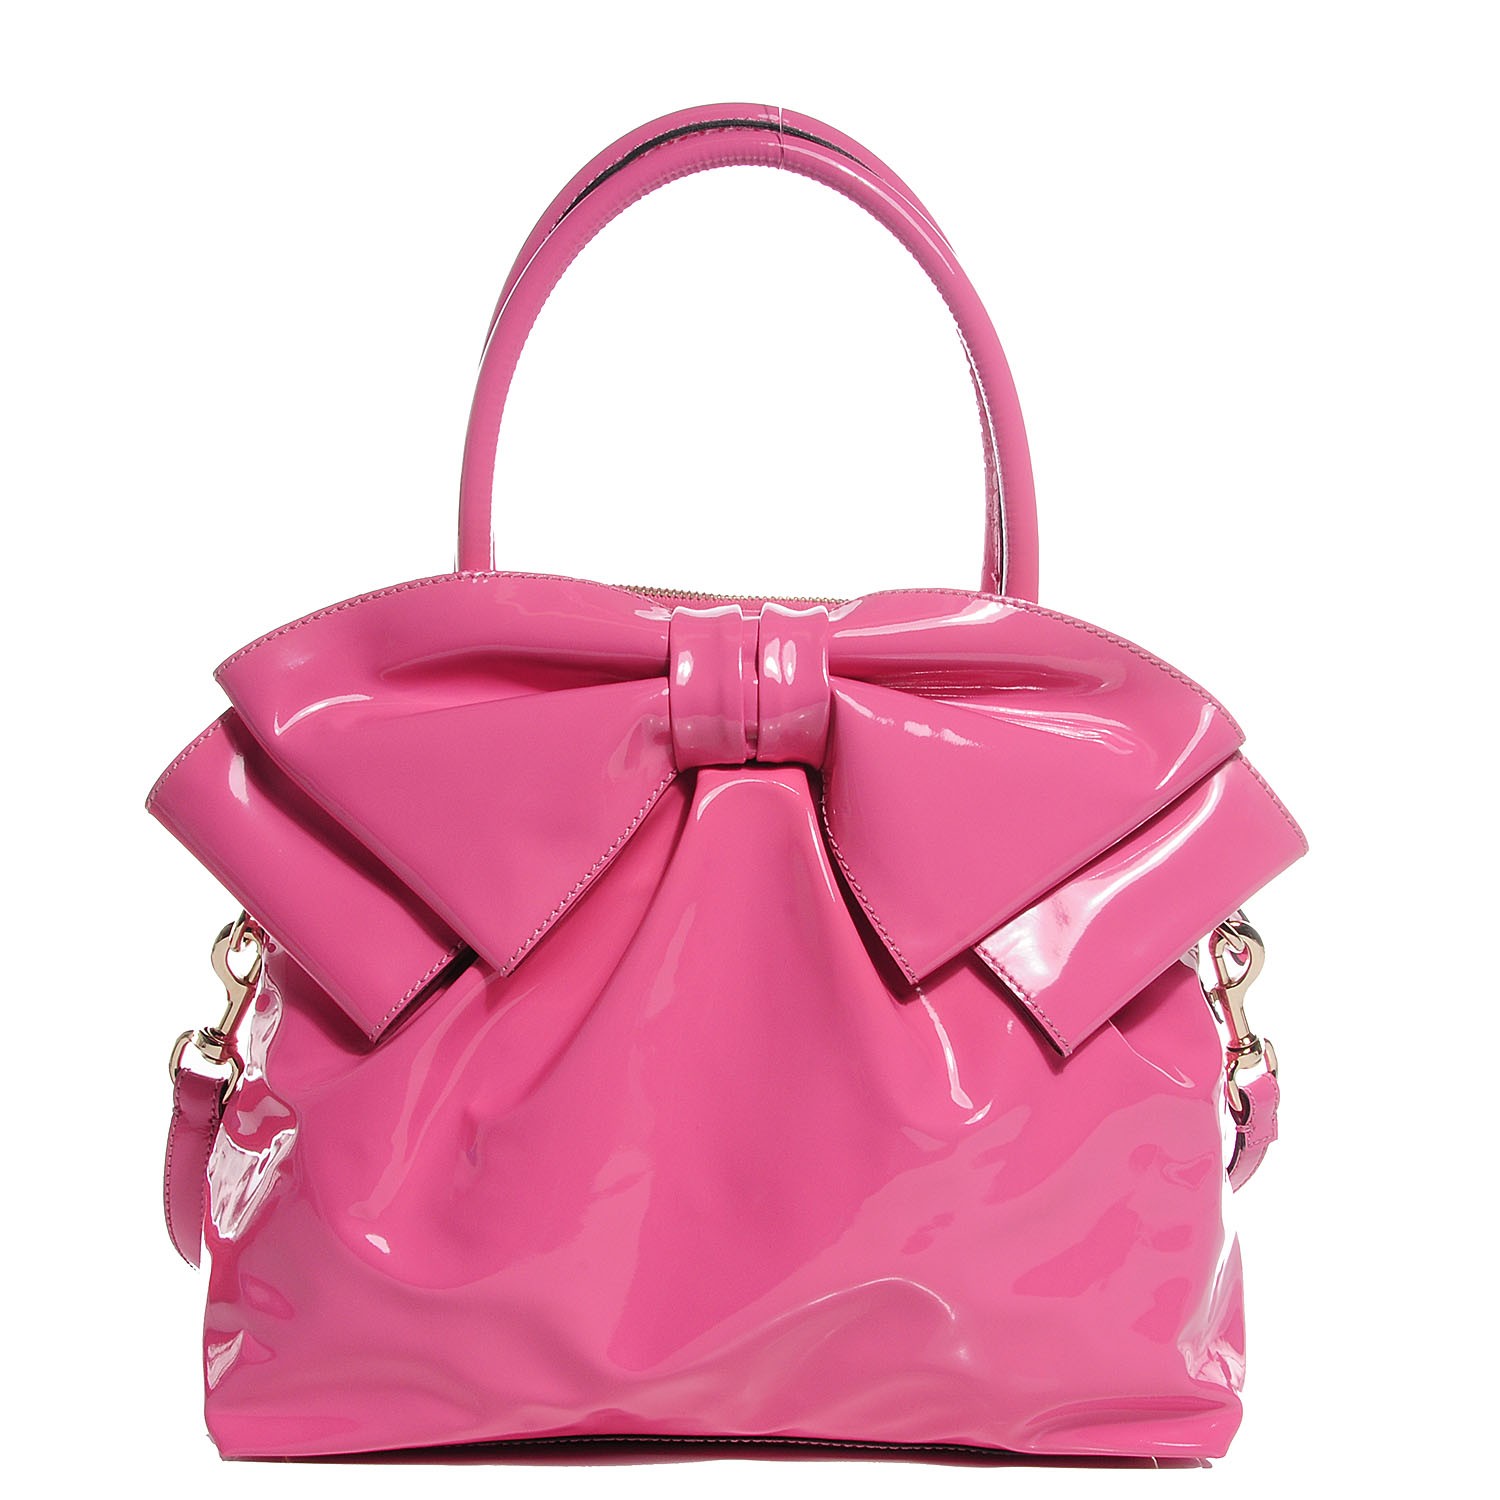 VALENTINO Lacca Bow Dome Bag Pink 99588